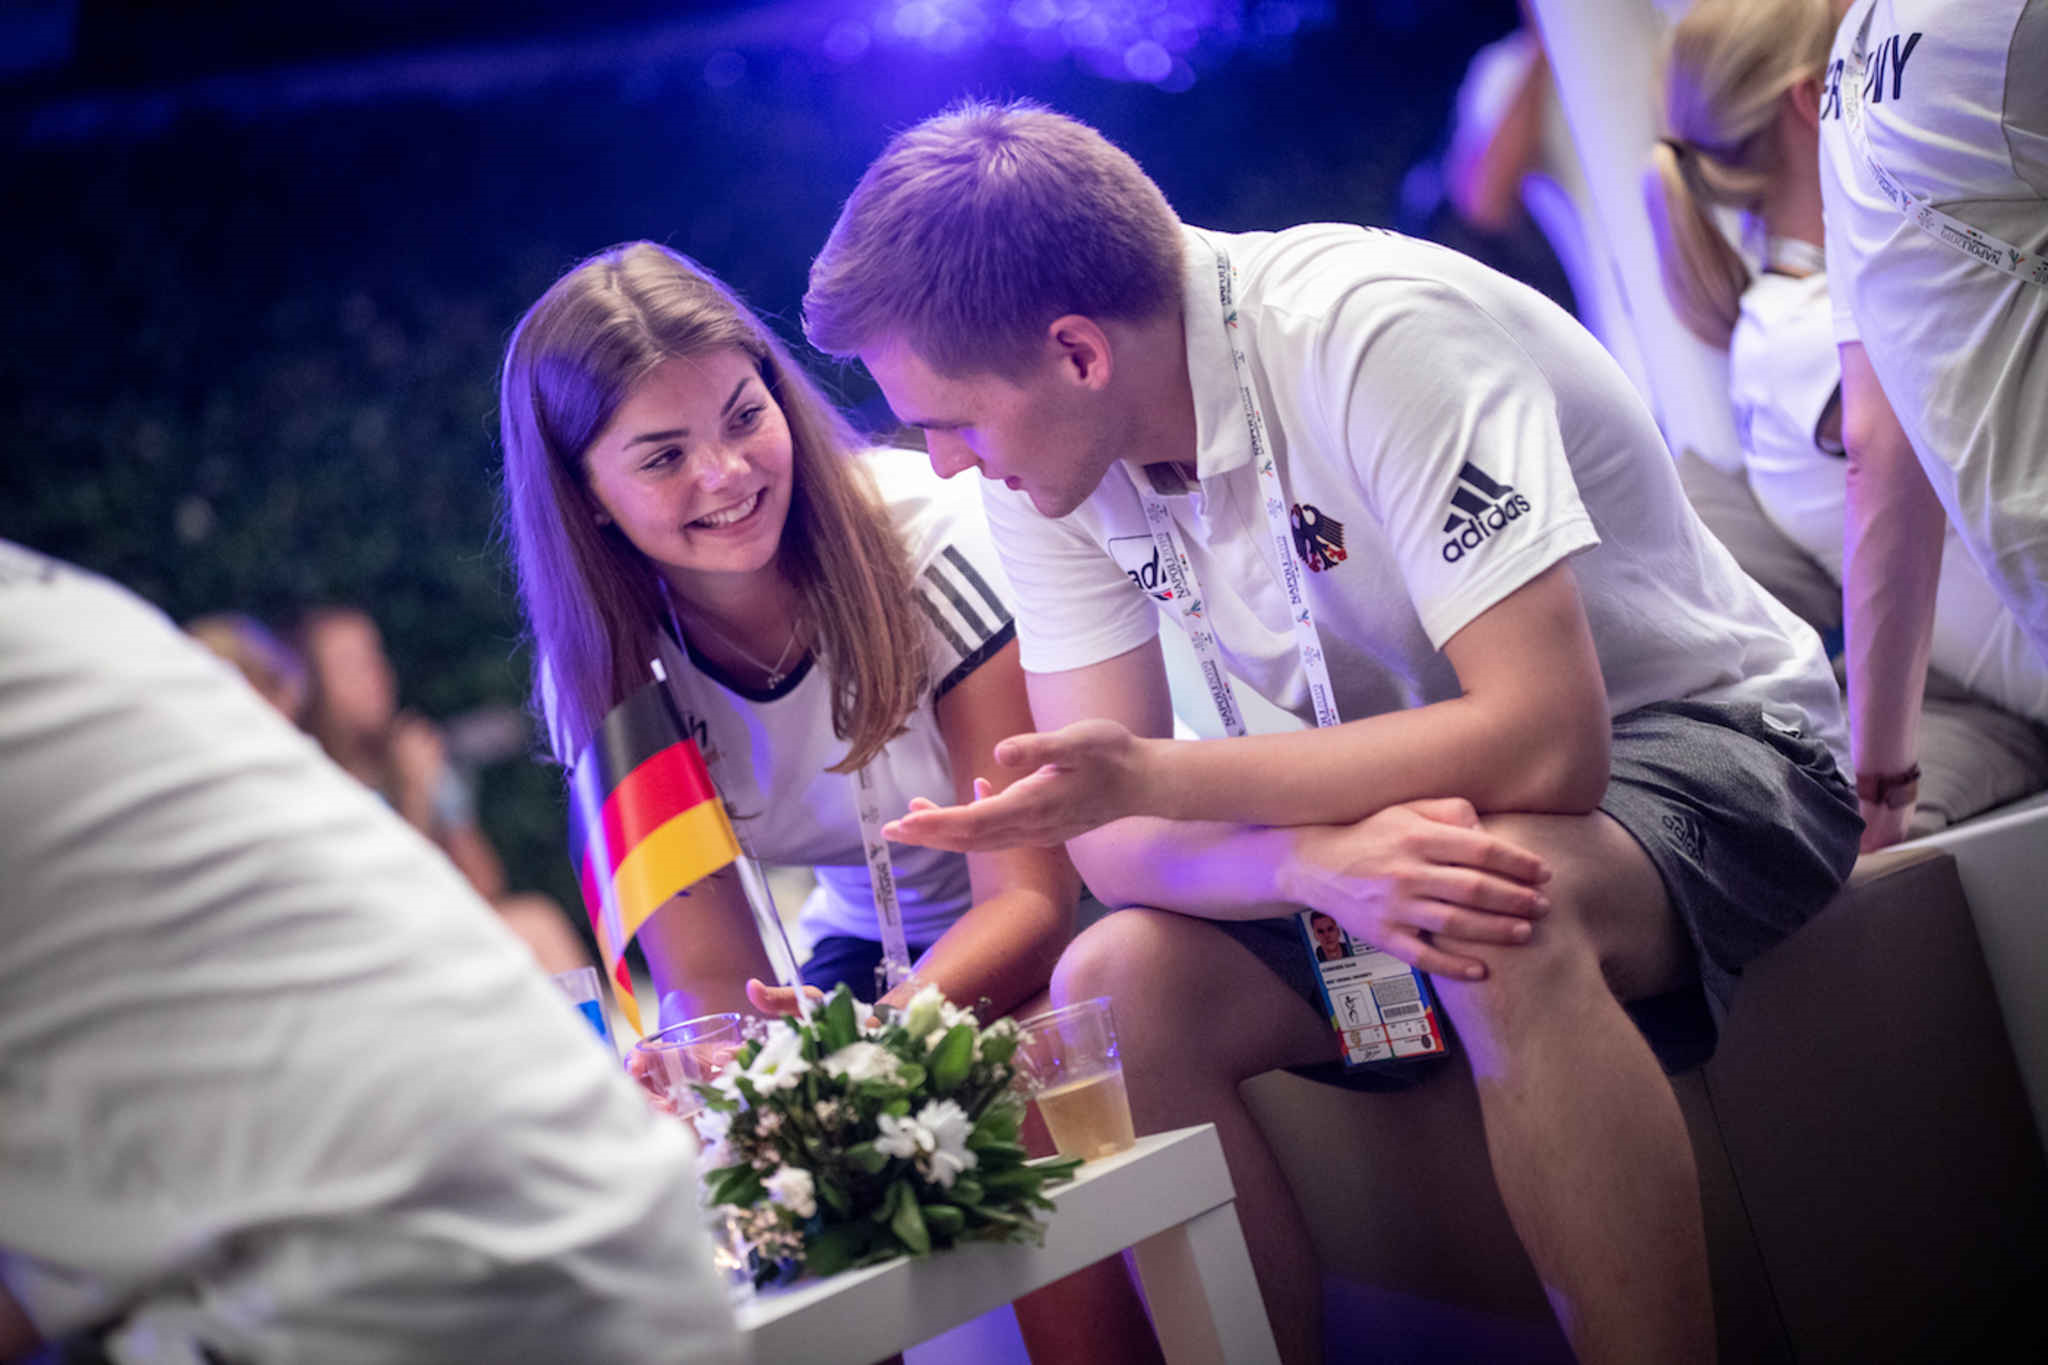 The Rhine Ruhr region could be awarded the World University Games next month ©FISU